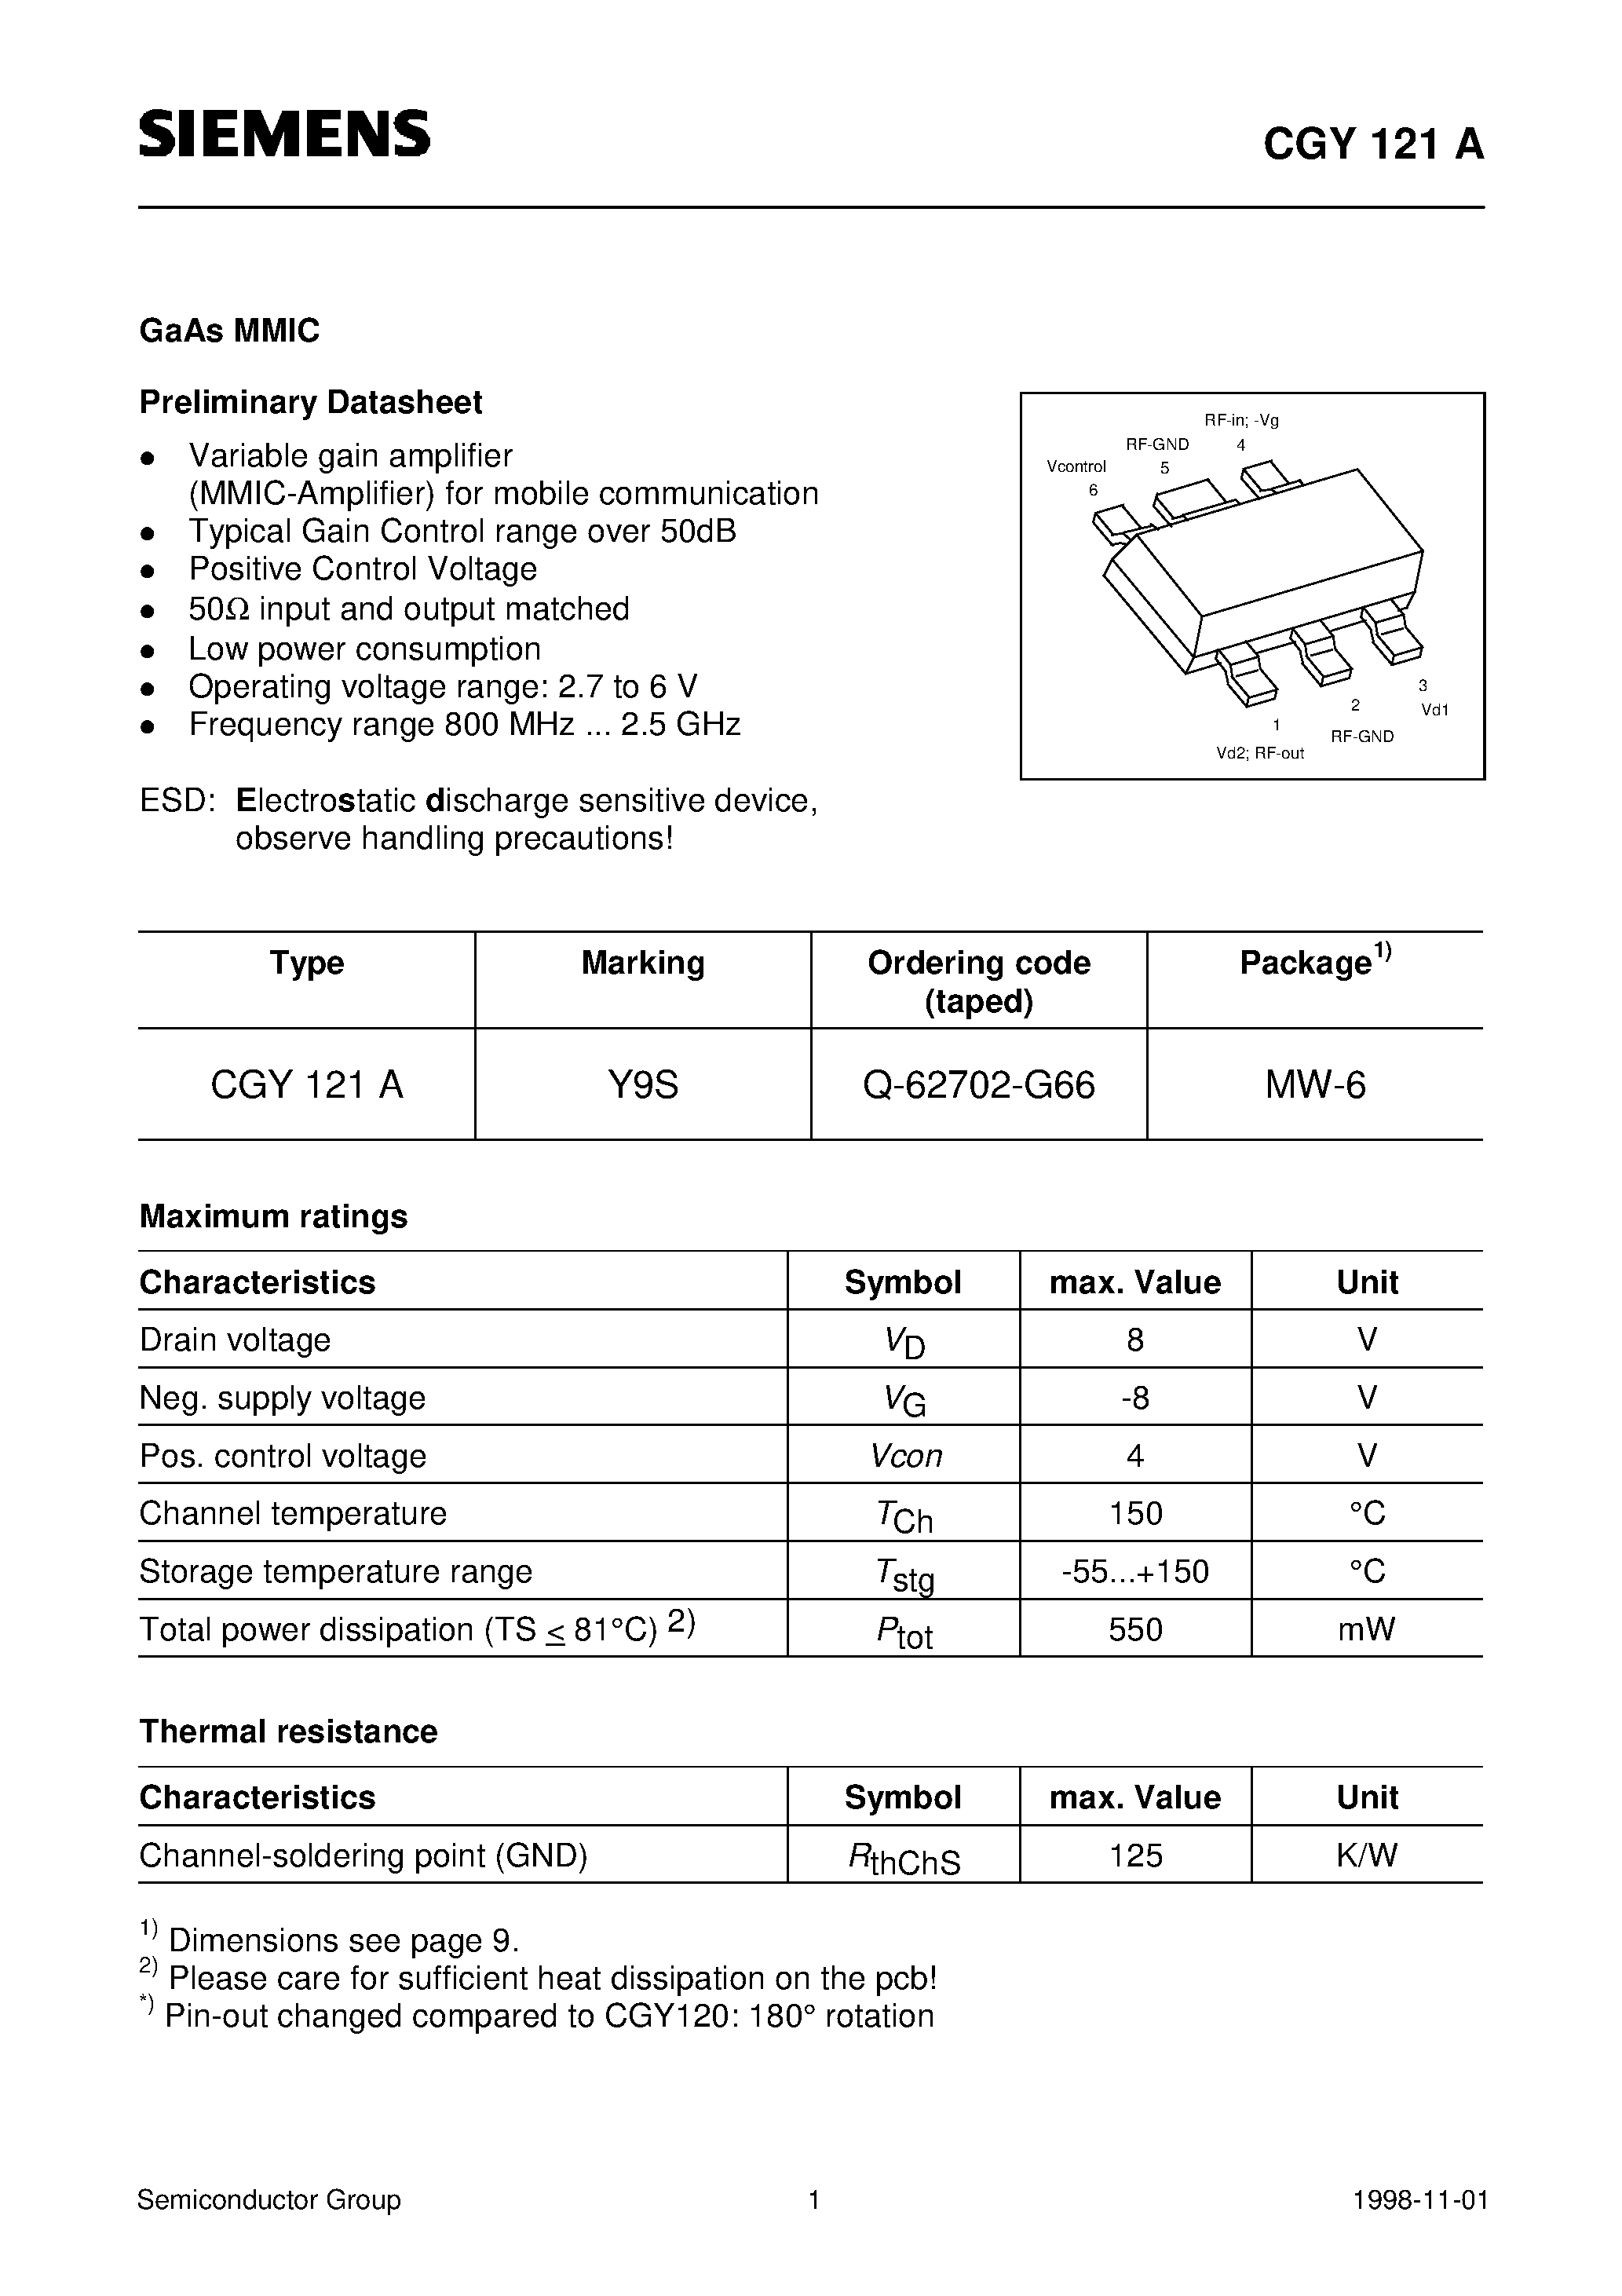 Datasheet Q-62702-G66 - GaAs MMIC (Variable gain amplifier MMIC-Amplifier for mobile communication Typical Gain Control range over 50dB) page 1